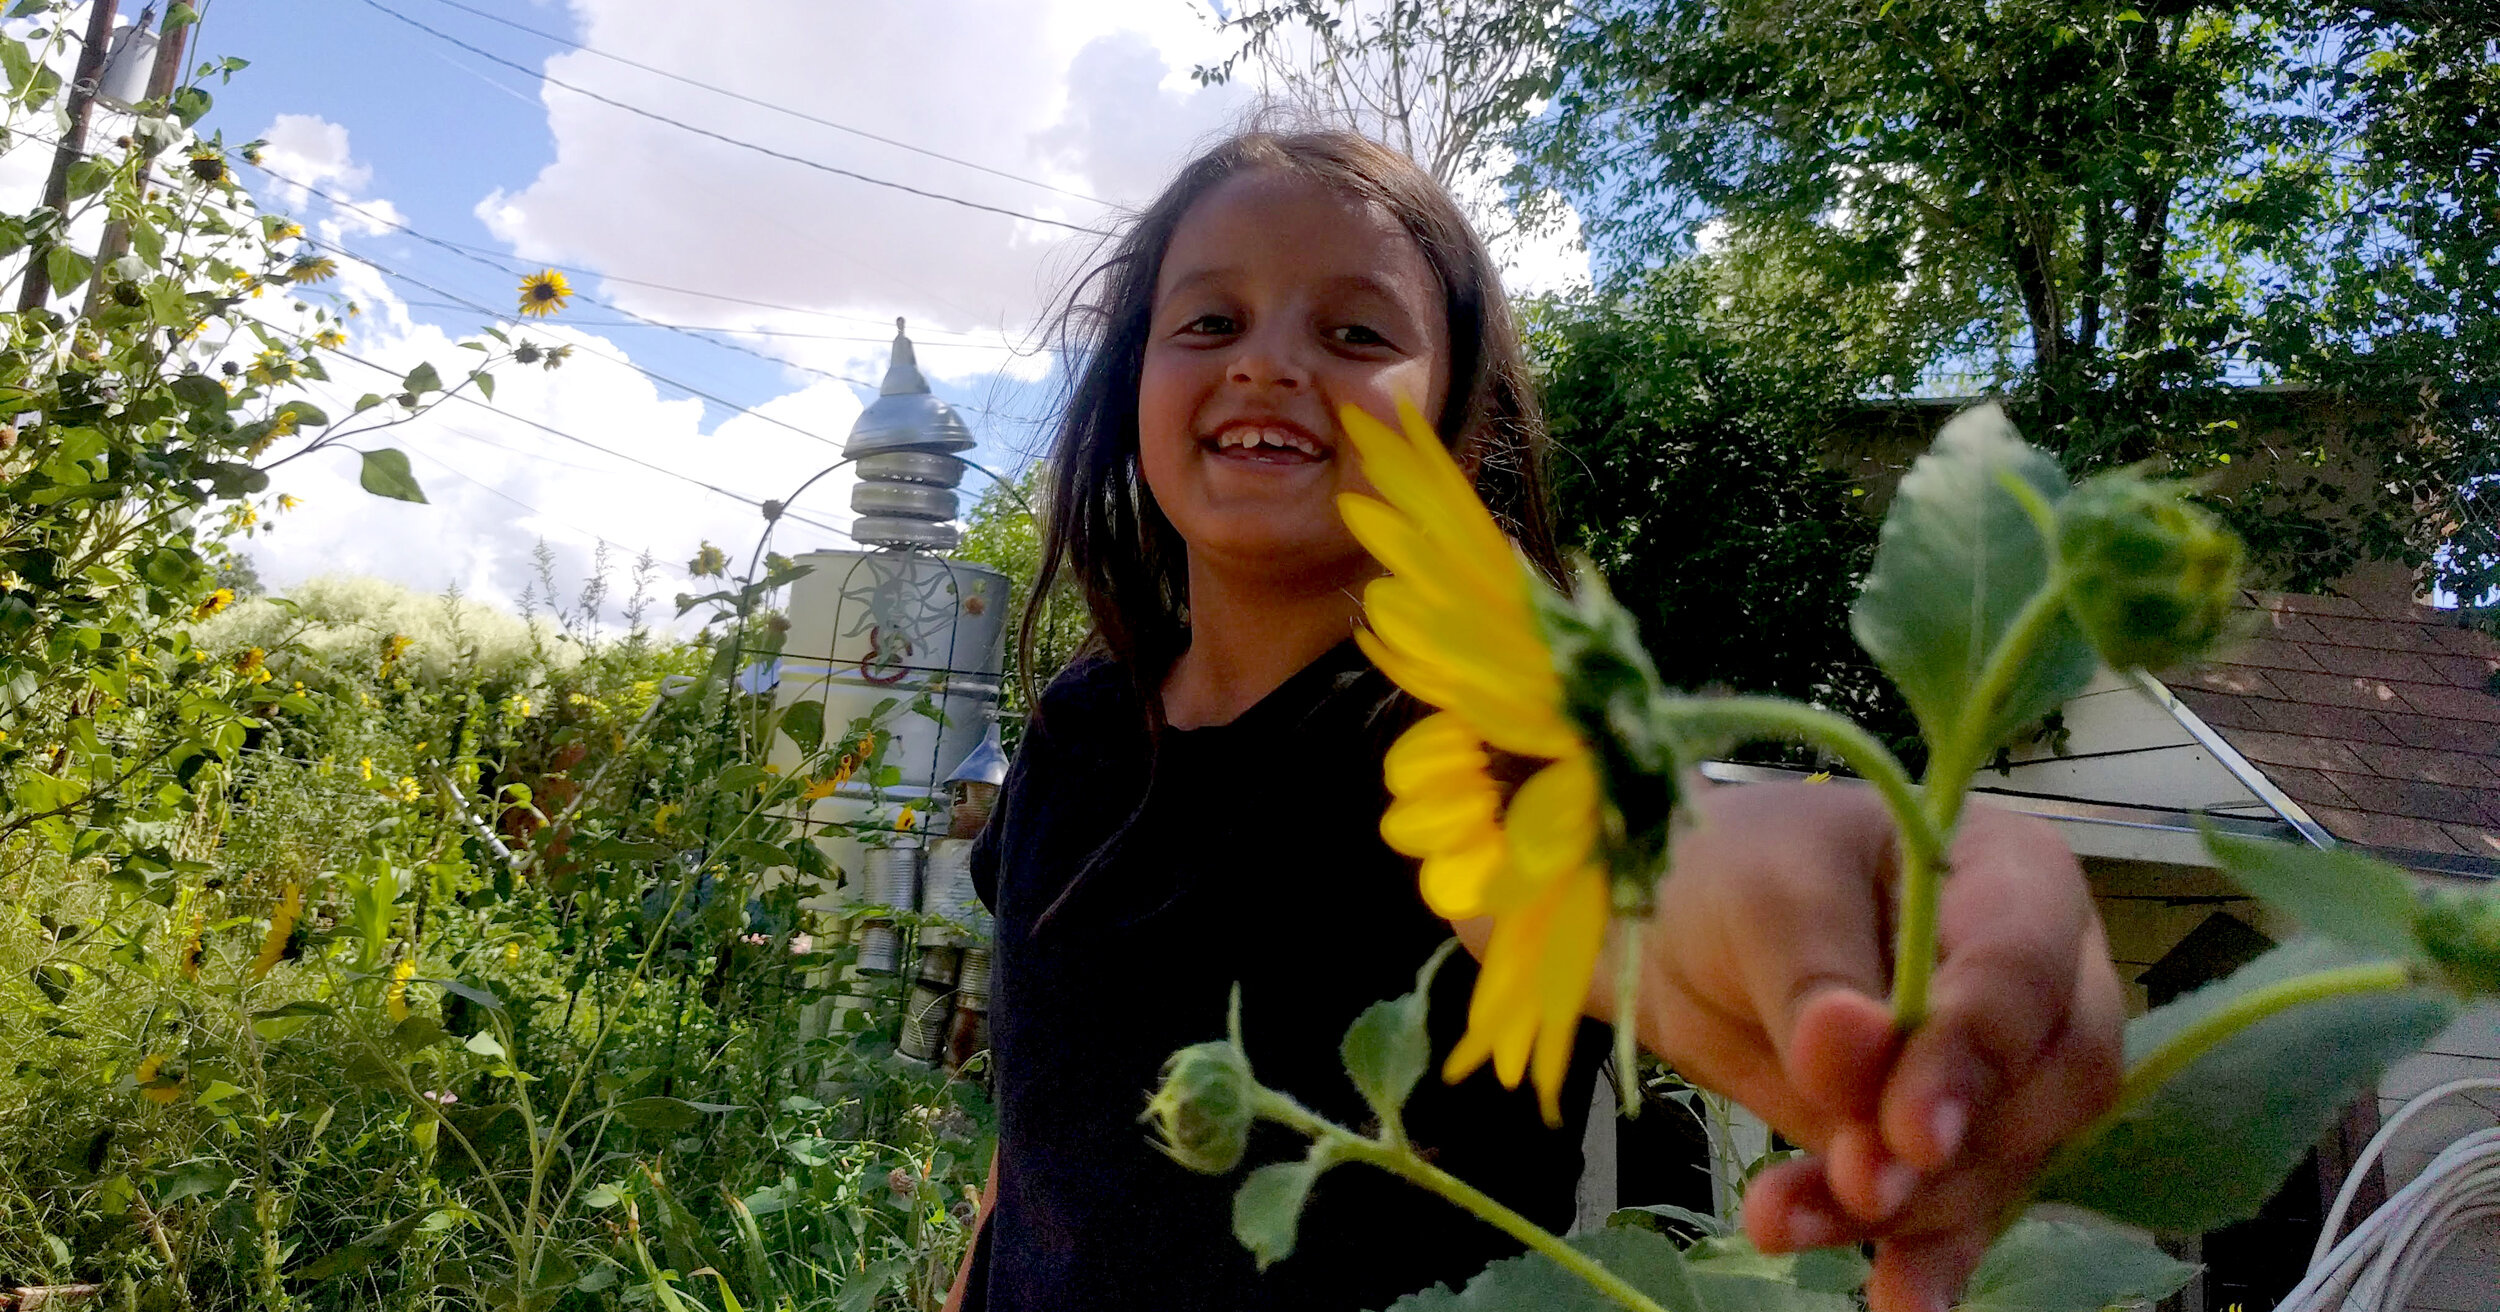 Smiling young girl holding a flower in a garden